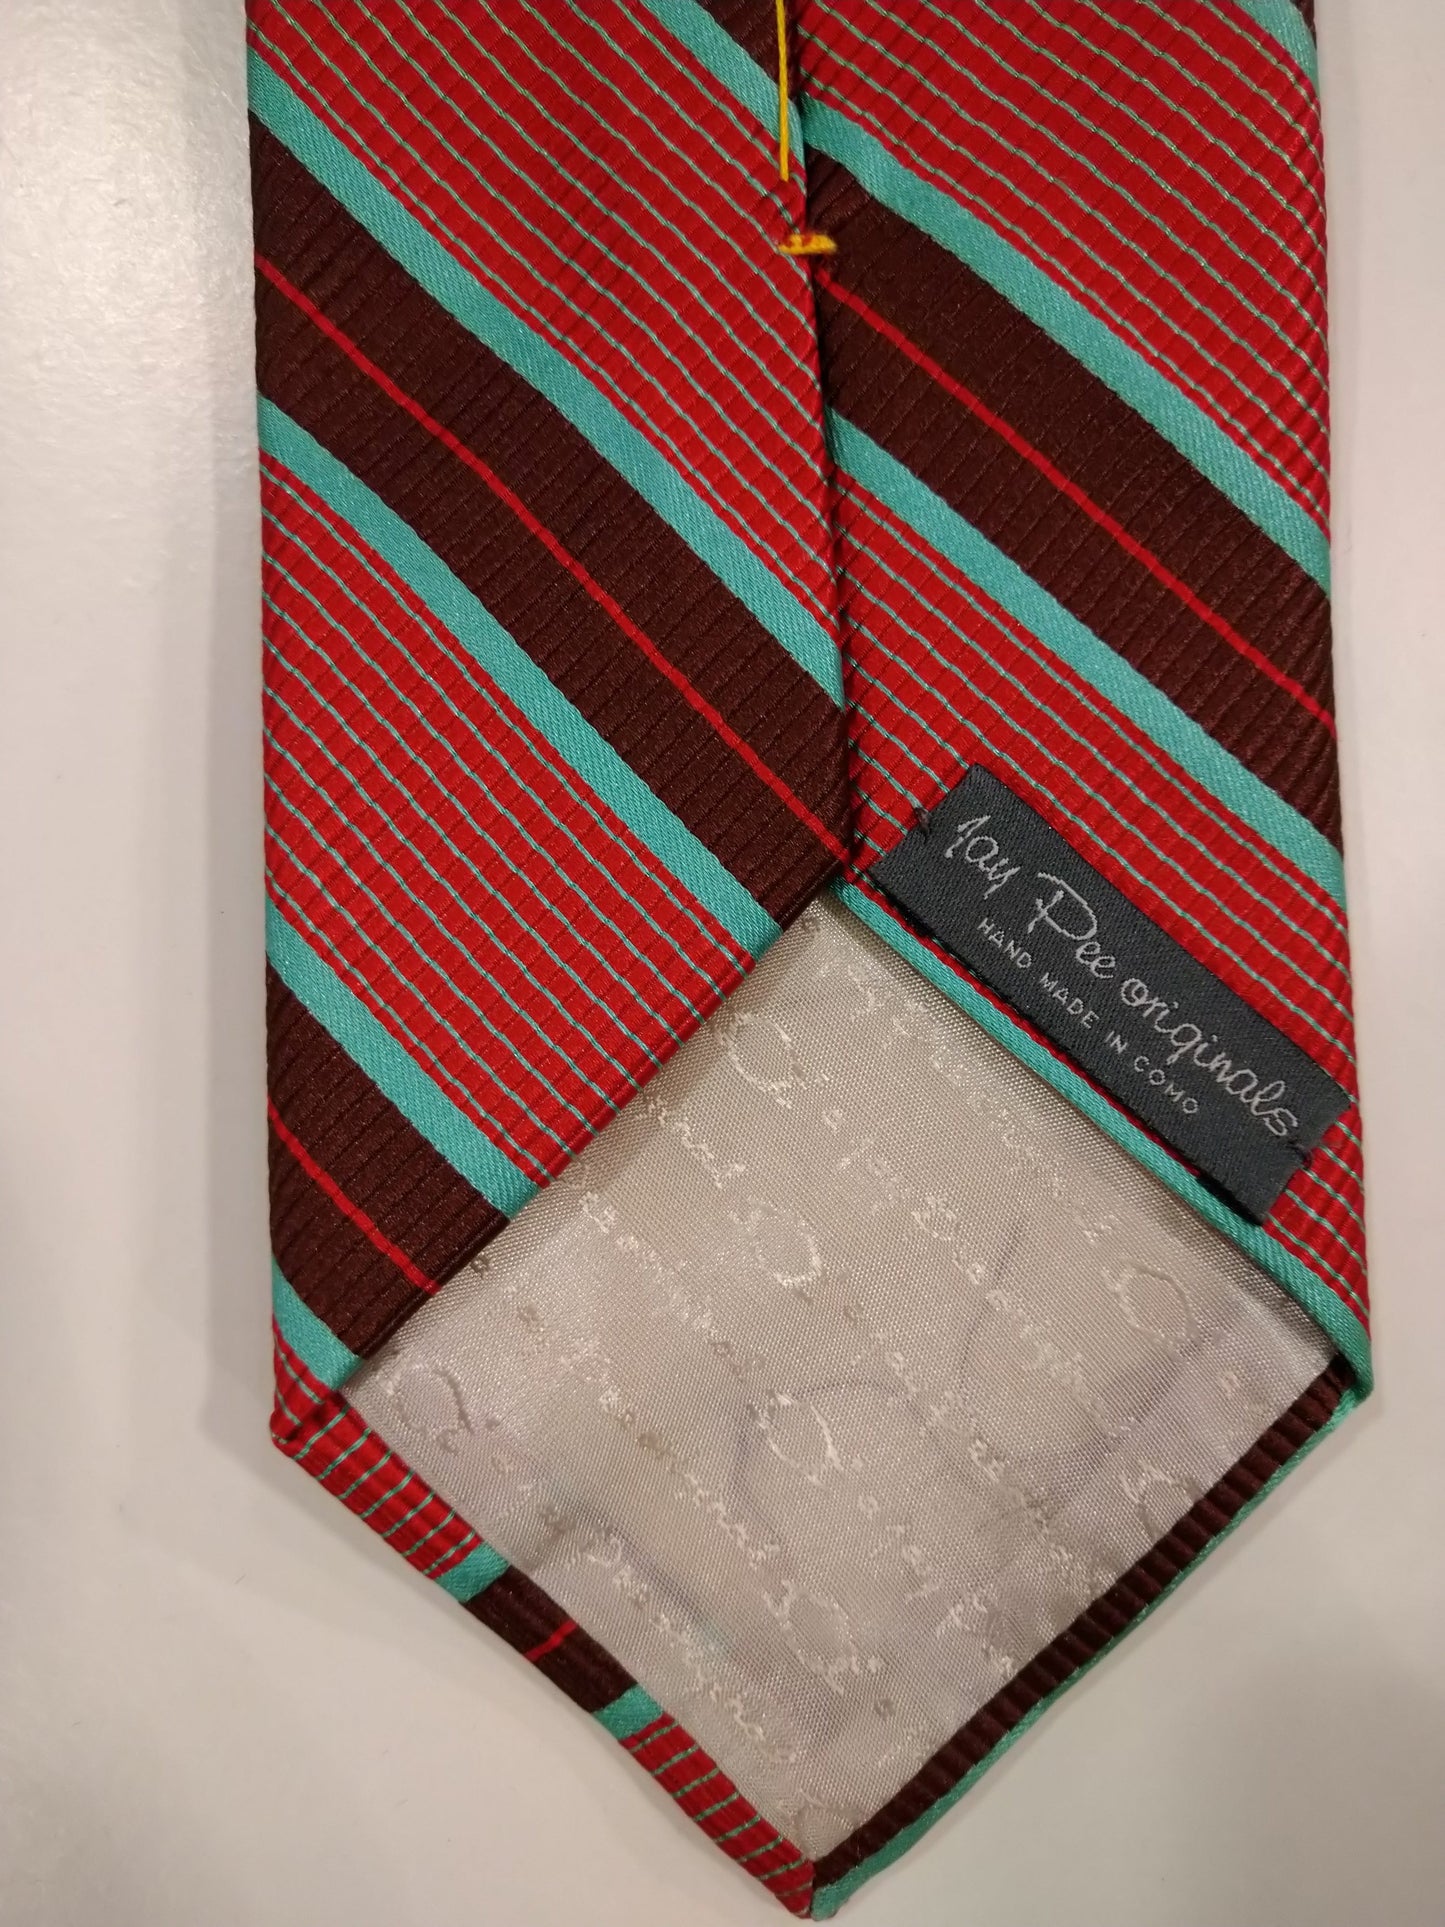 Jay Pee Original Hand Made in Como Silk Tie. Red brown turquoise striped.